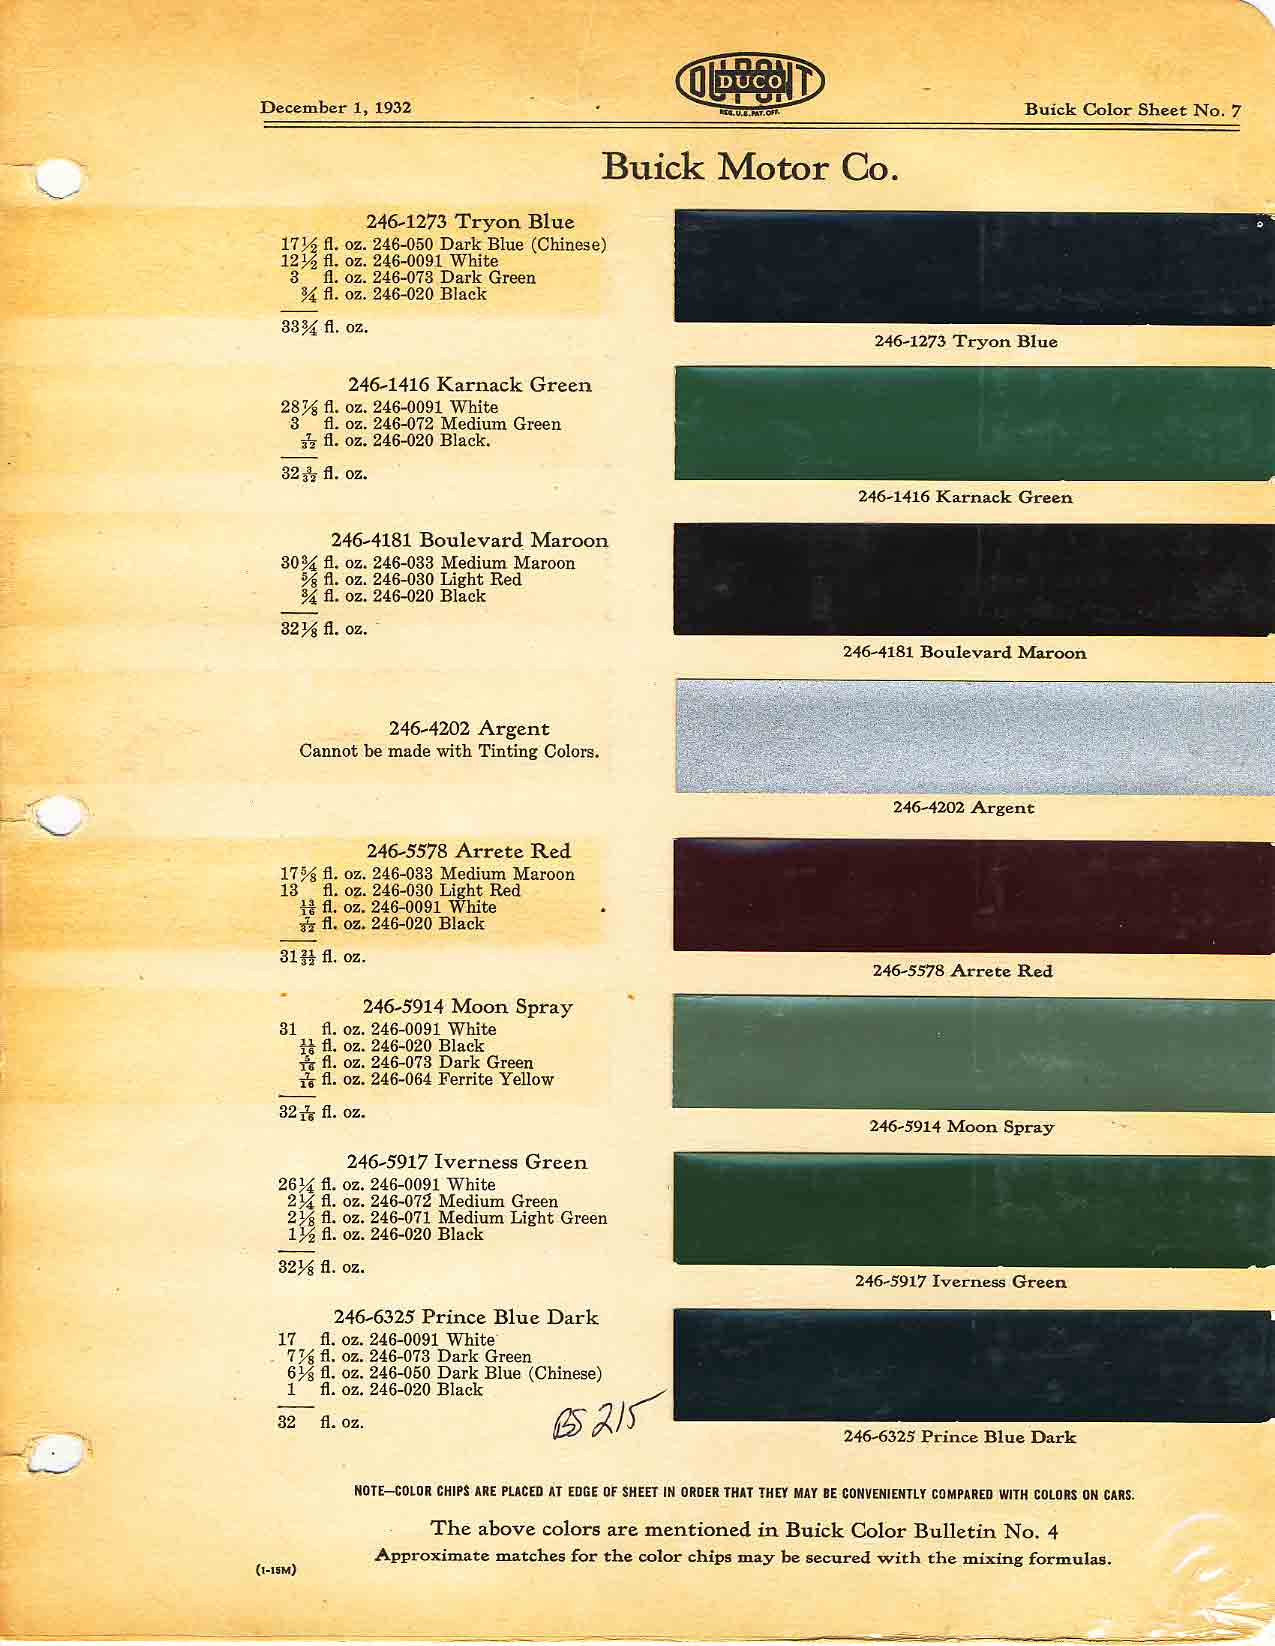 Buick color chart that contains color codes and paint swatches for the exterior color of a Buick vehicle.